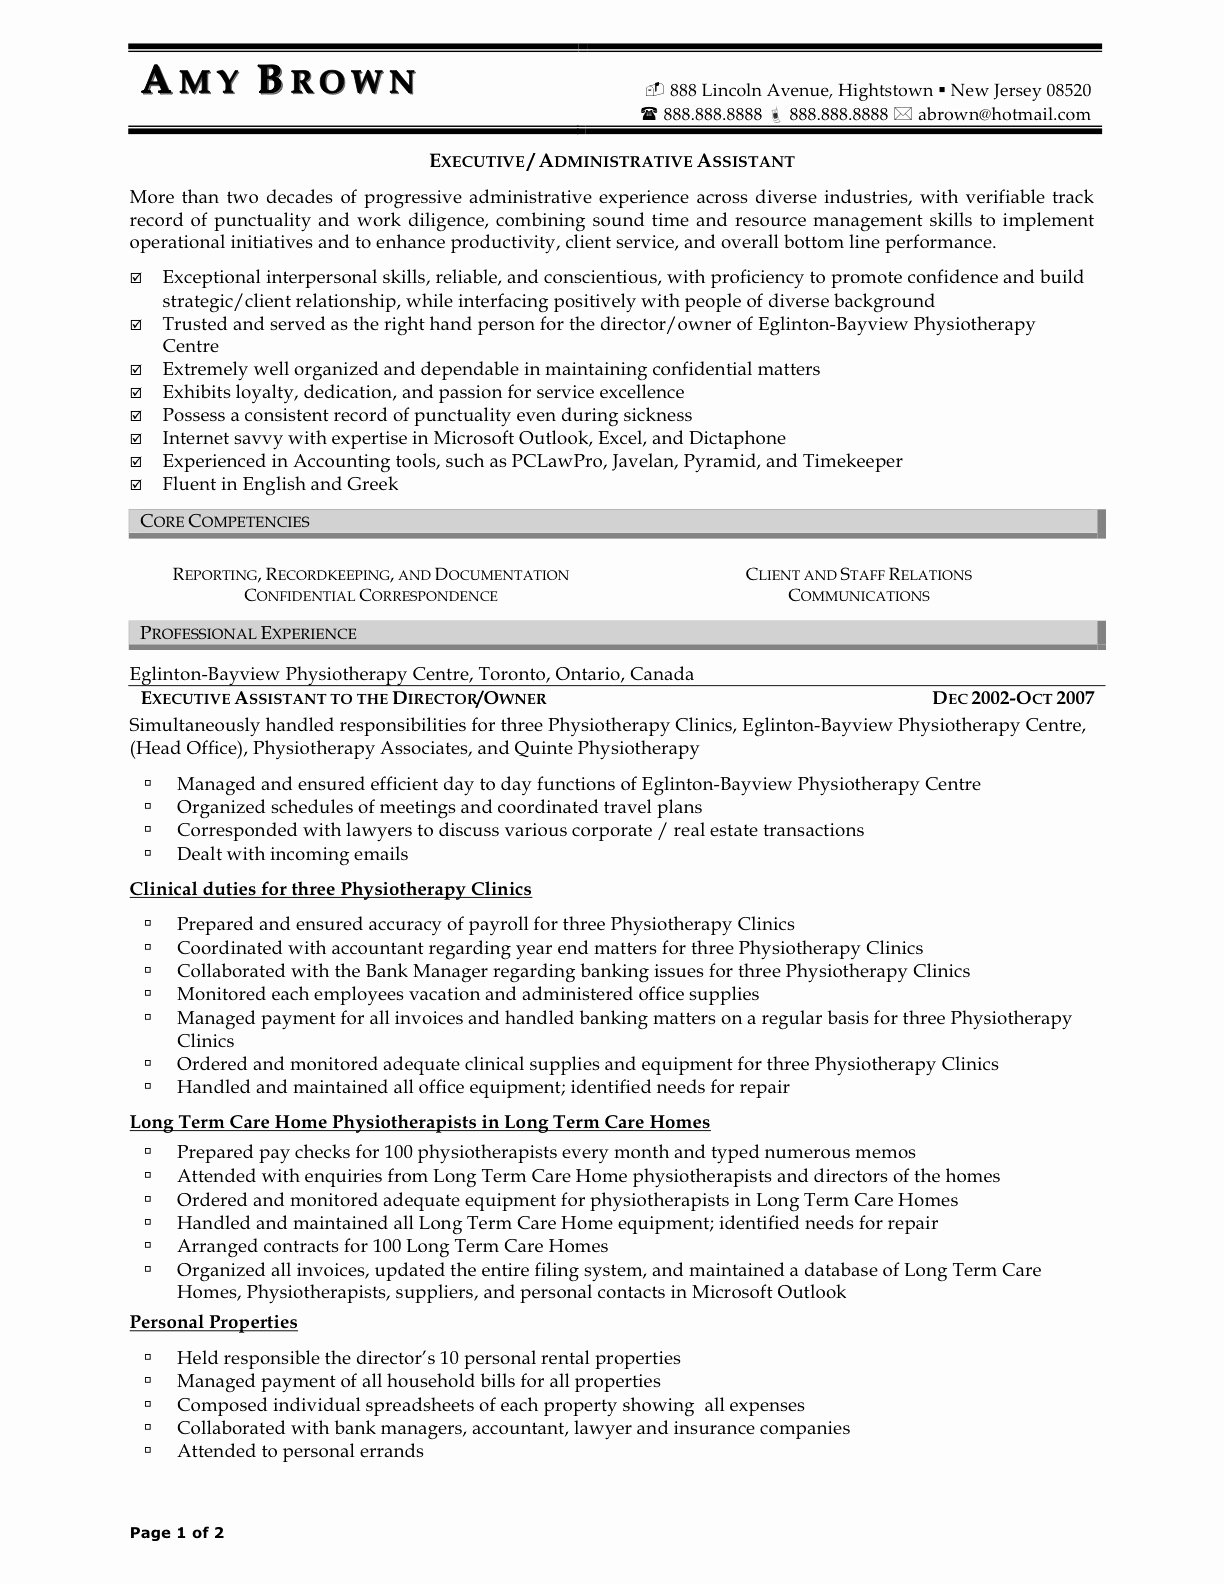 10 Executive assistant Resume Sample